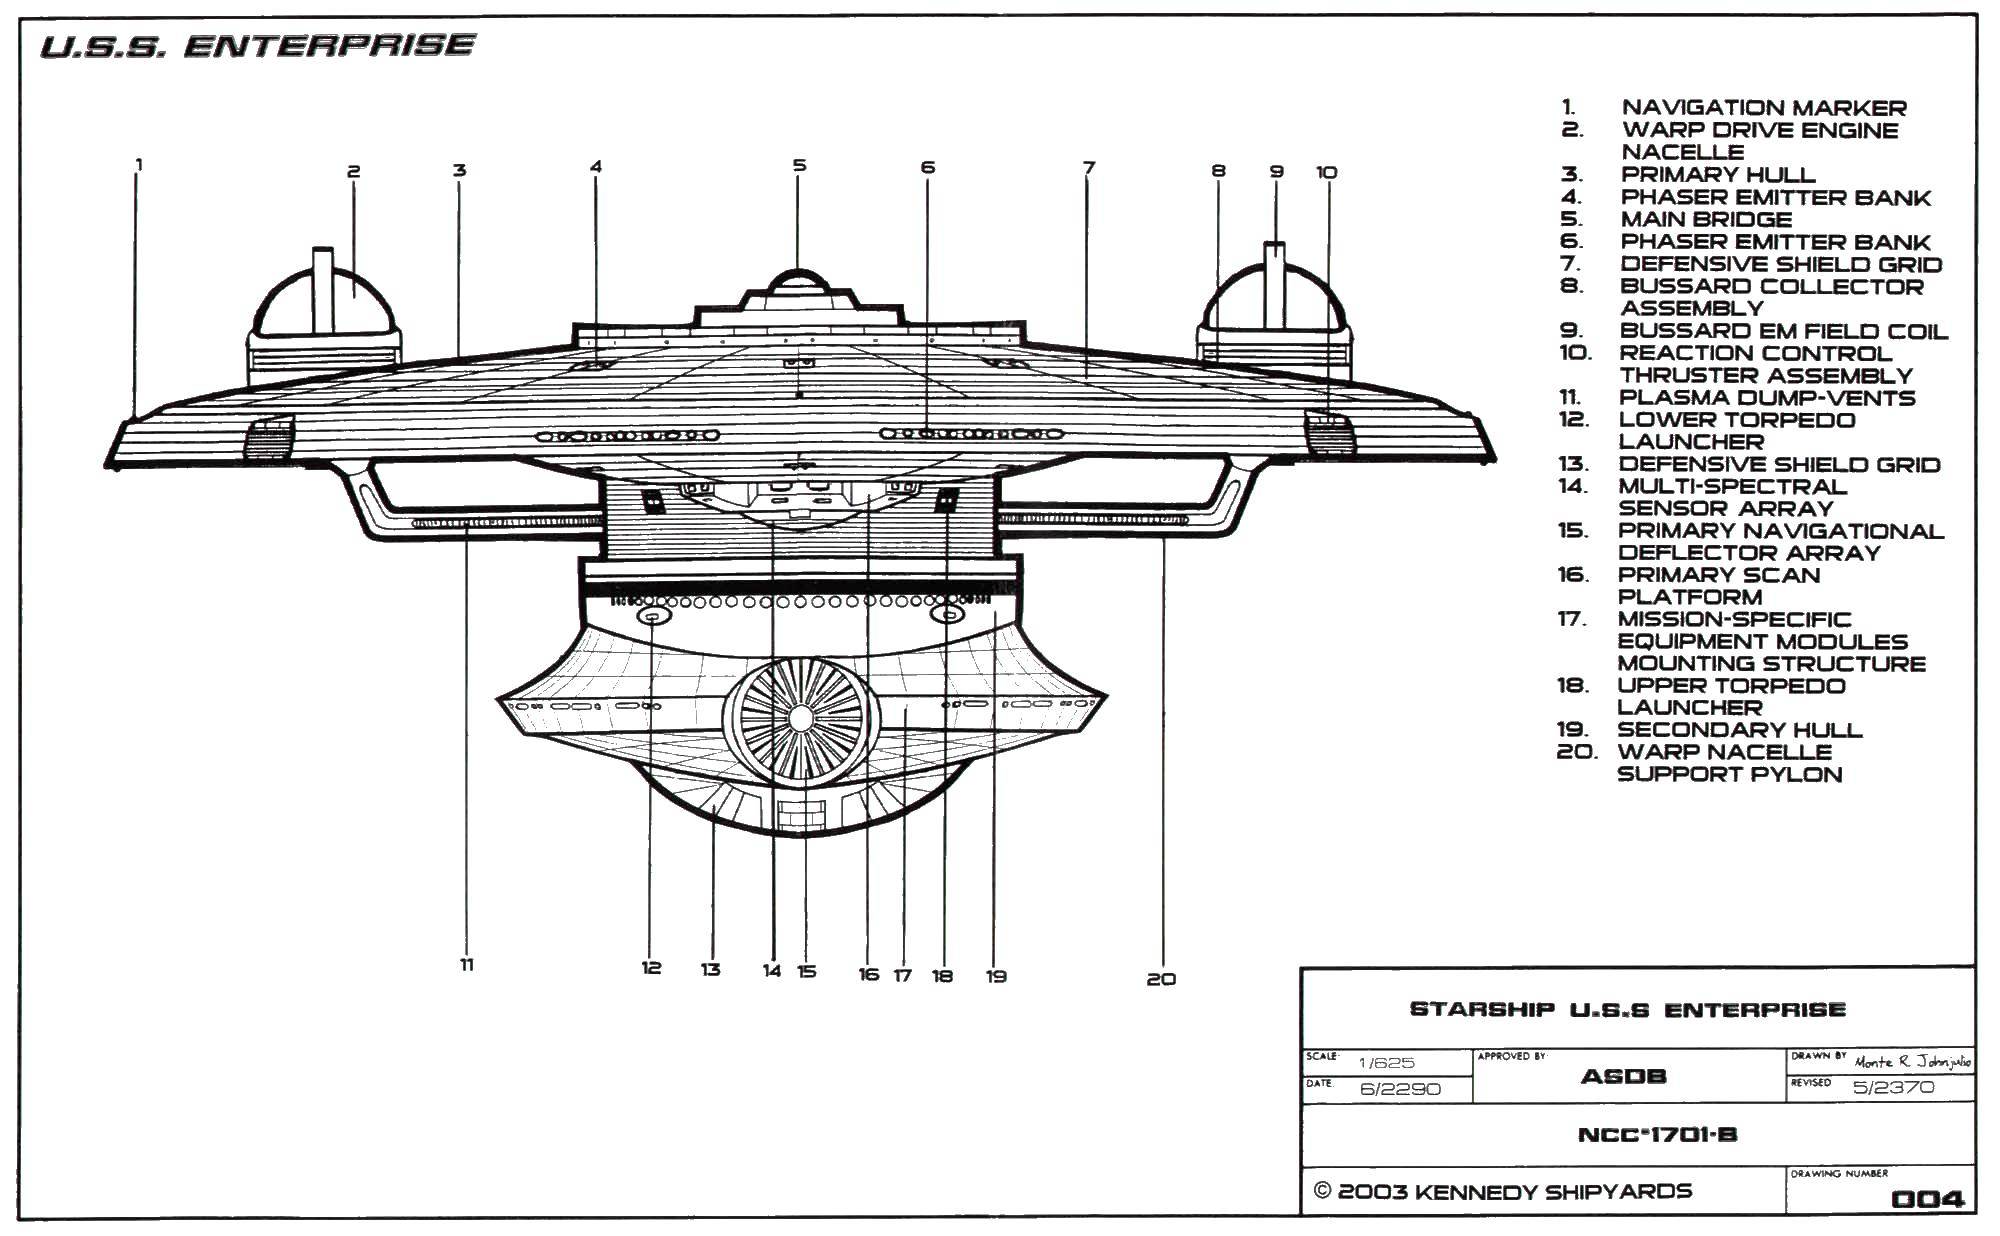 Coloring The structure cruiser. Category spaceships. Tags:  spaceship, cruiser.